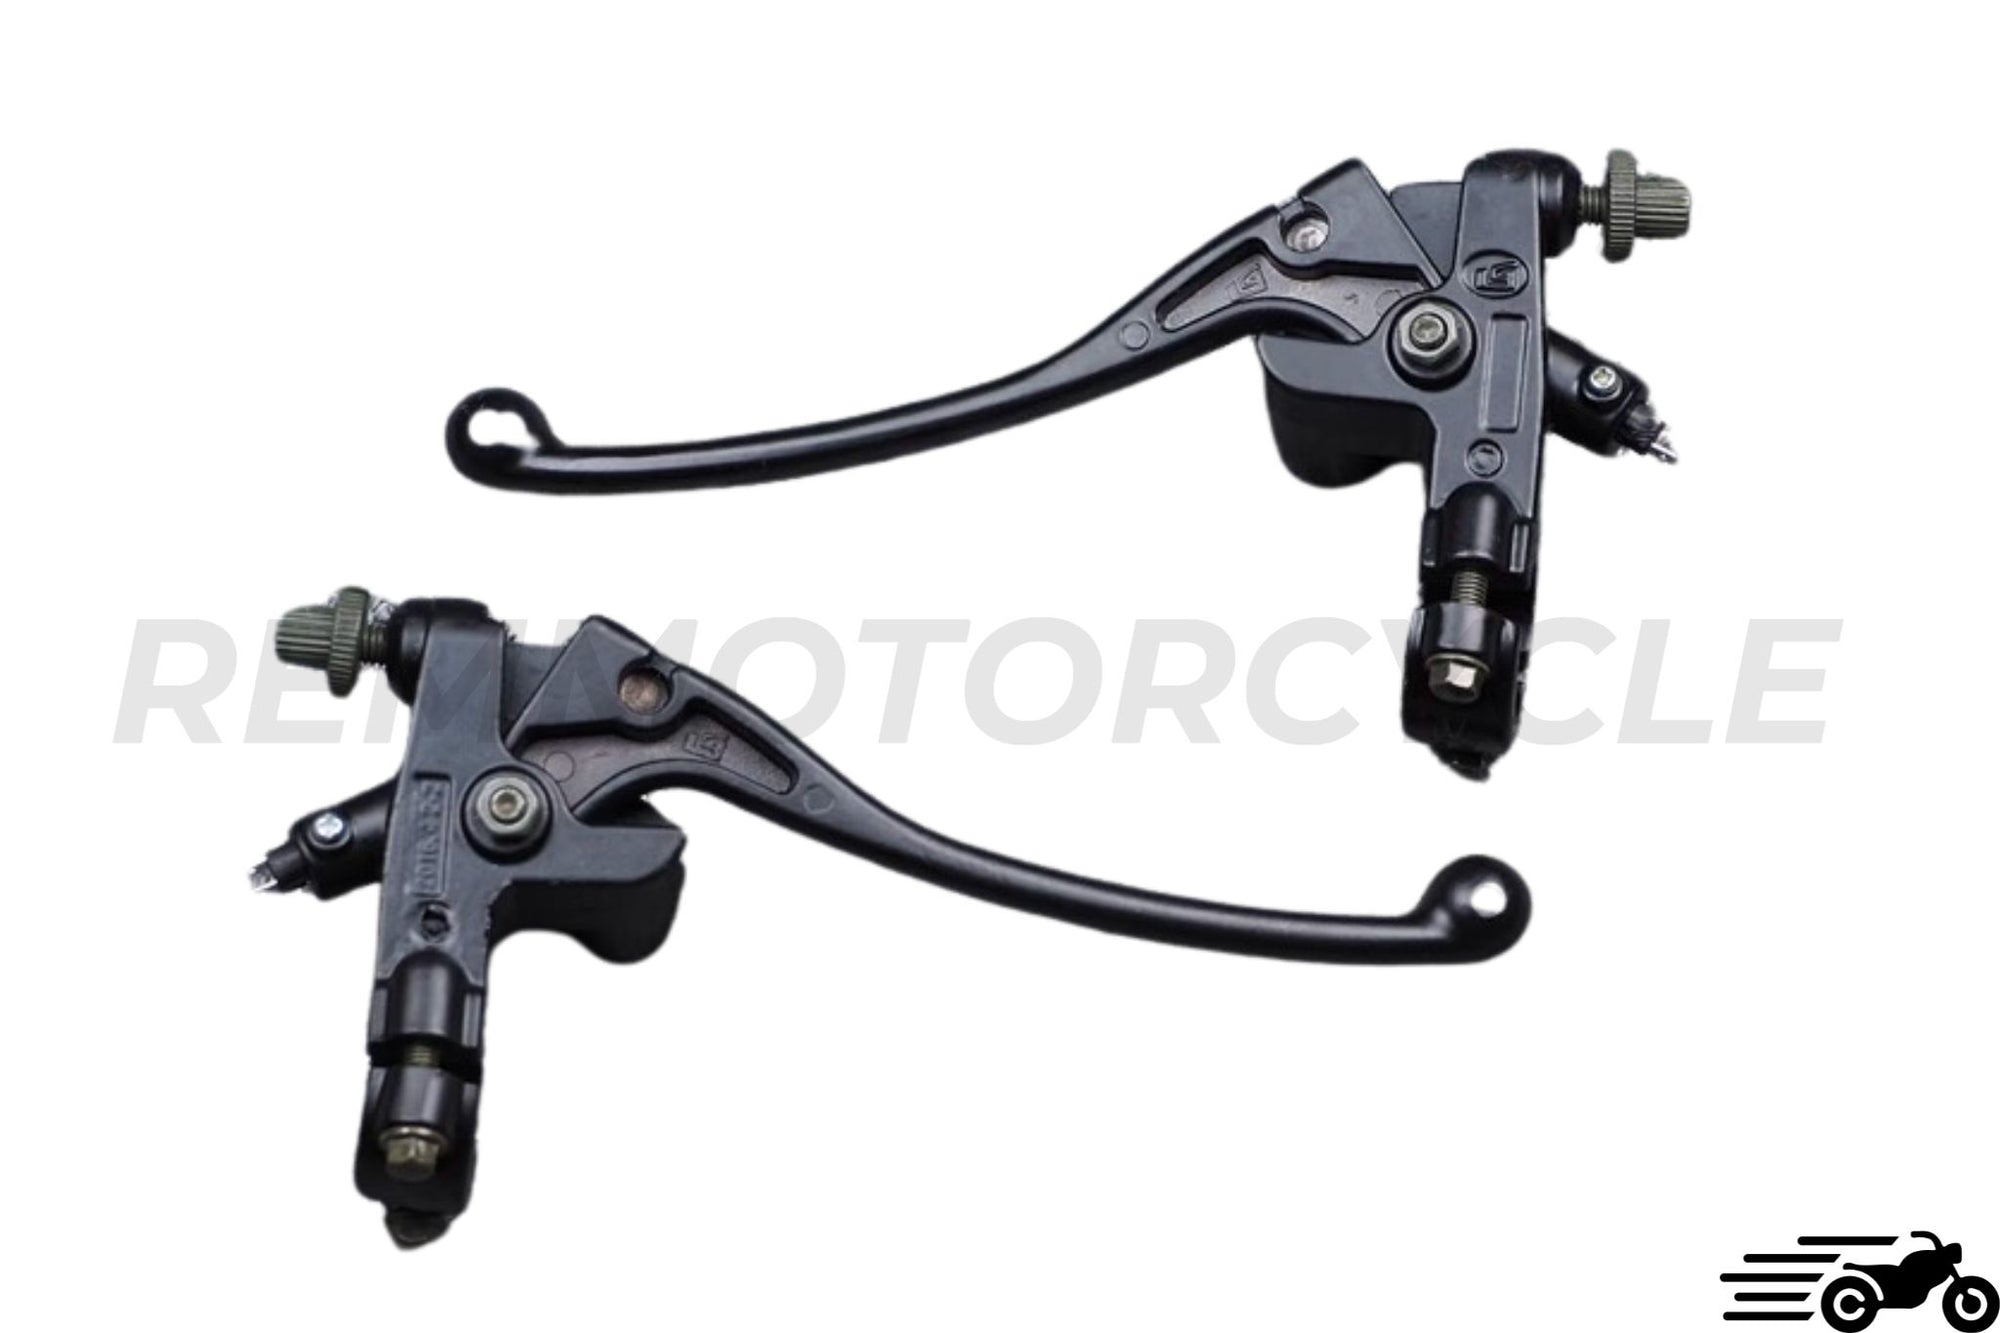 25mm clutch lever and drum brake lever assembly